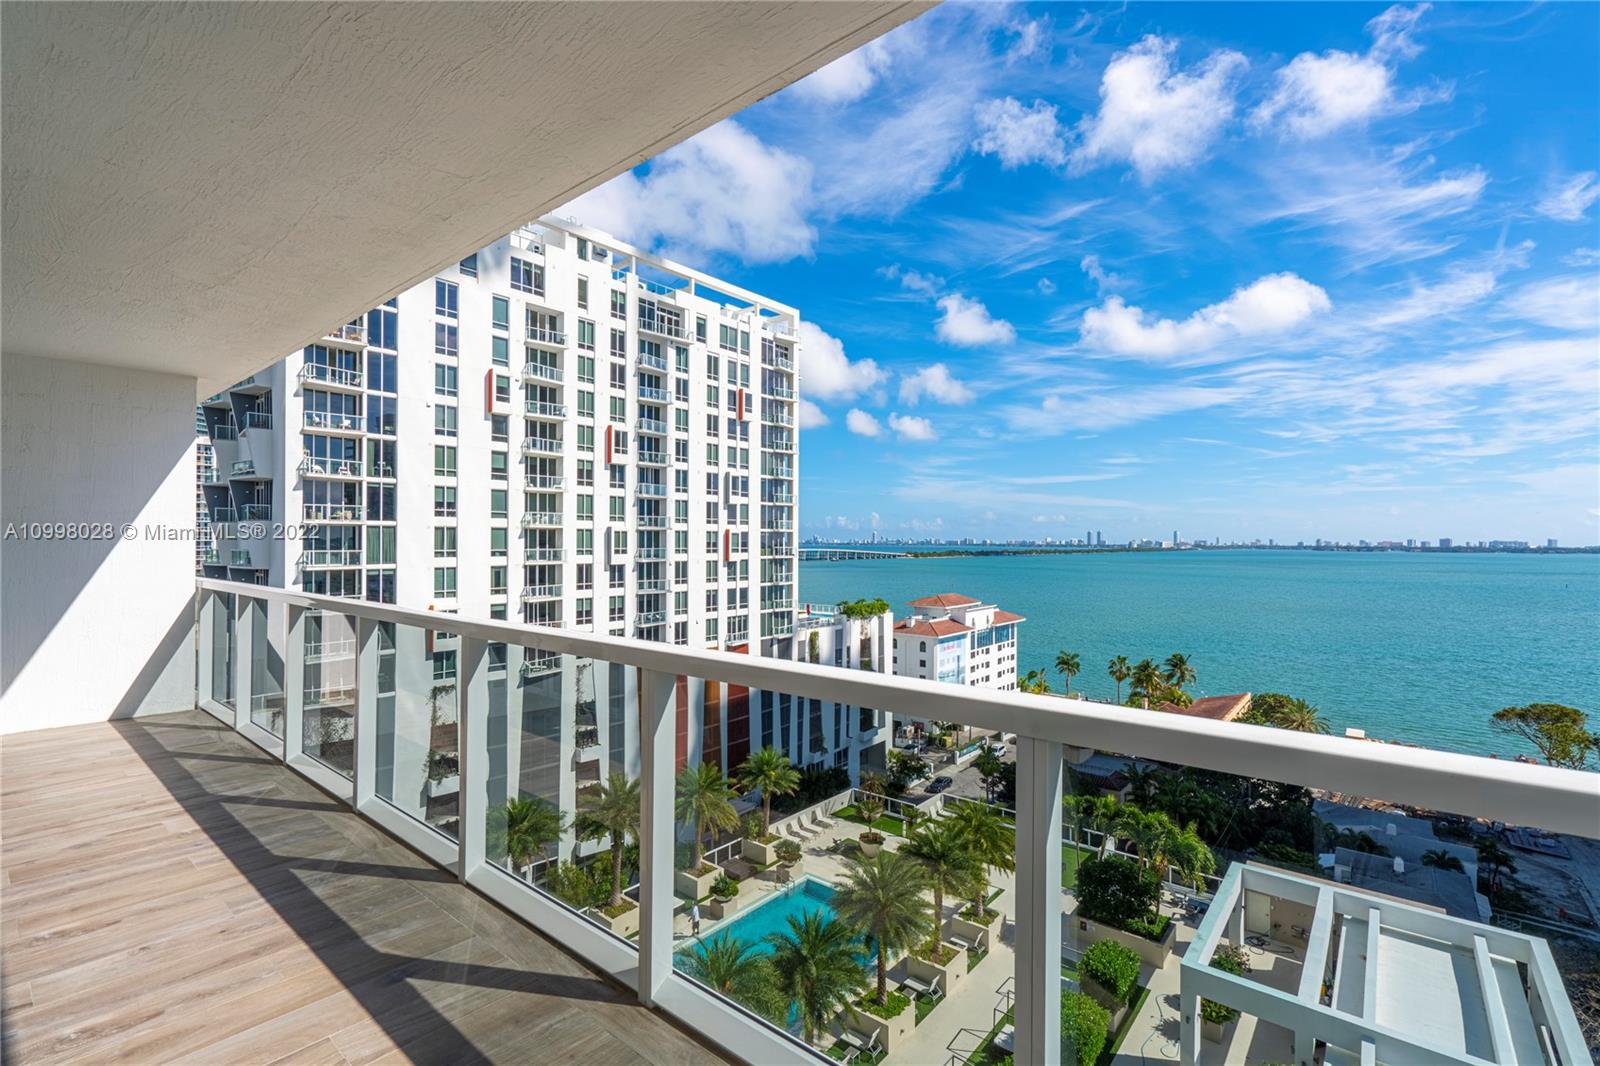 Bay House is a 38-story condominium building located in Edgewater Miami. Completed in 2015, Bay Hous